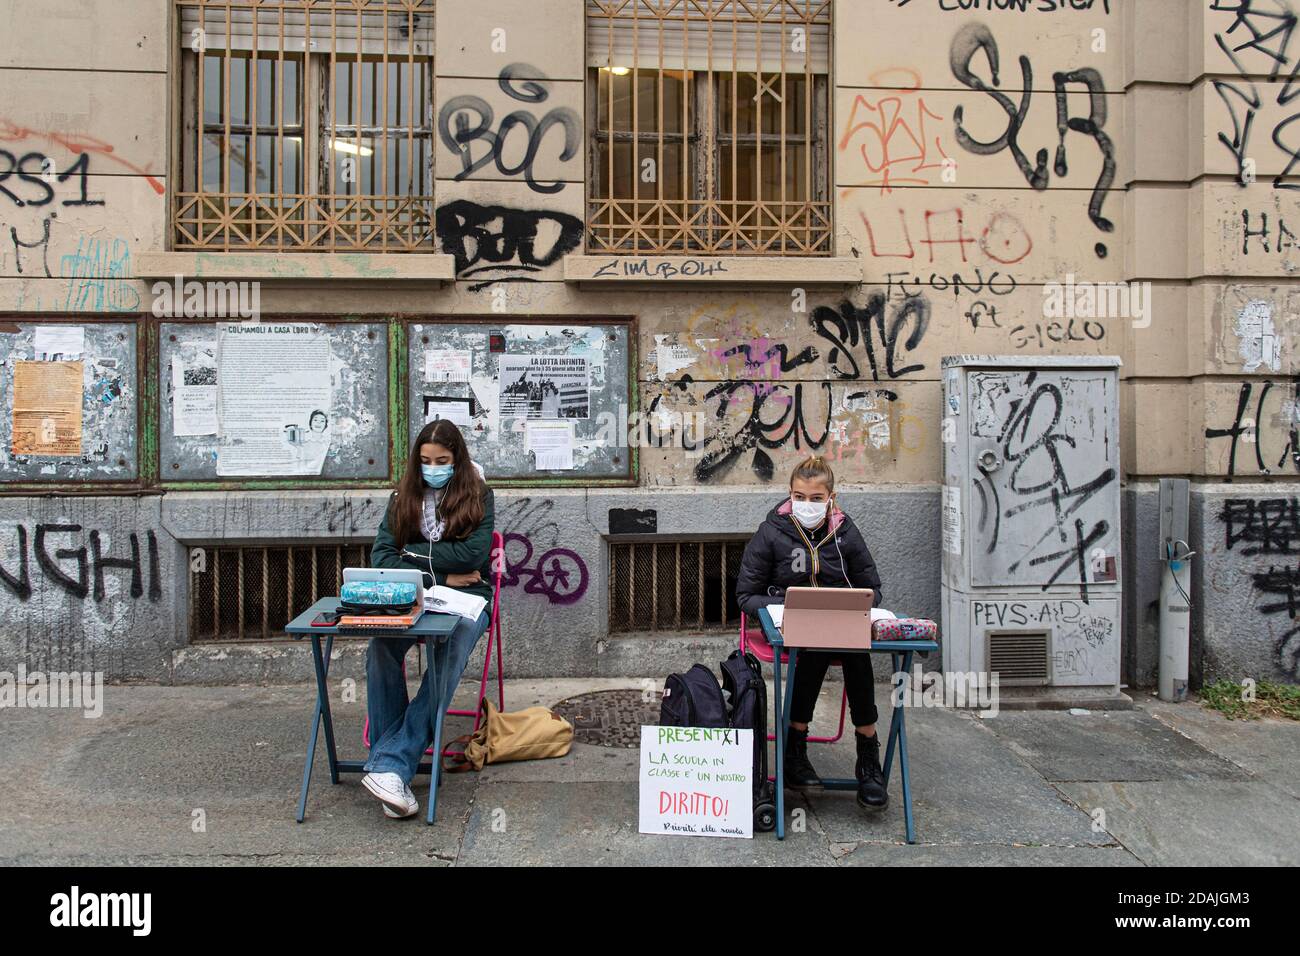 TURIN, ITALY - November 13, 2020: Two students of secondary school Calvino, called Anita (R) and Lisa, follow a distance learning (DaD) lesson on the street outside their school to protest against schools closures imposed by the government due to an increase in COVID-19 coronavirus disease infections. Anita has been protesting every school day since November 6 when Piedmont became a red zone, a day later Lisa joined her. On November 11 Anita received a solidarity call from the Italian Minister of Education Lucia Azzolina. (Photo by Nicol Stock Photo